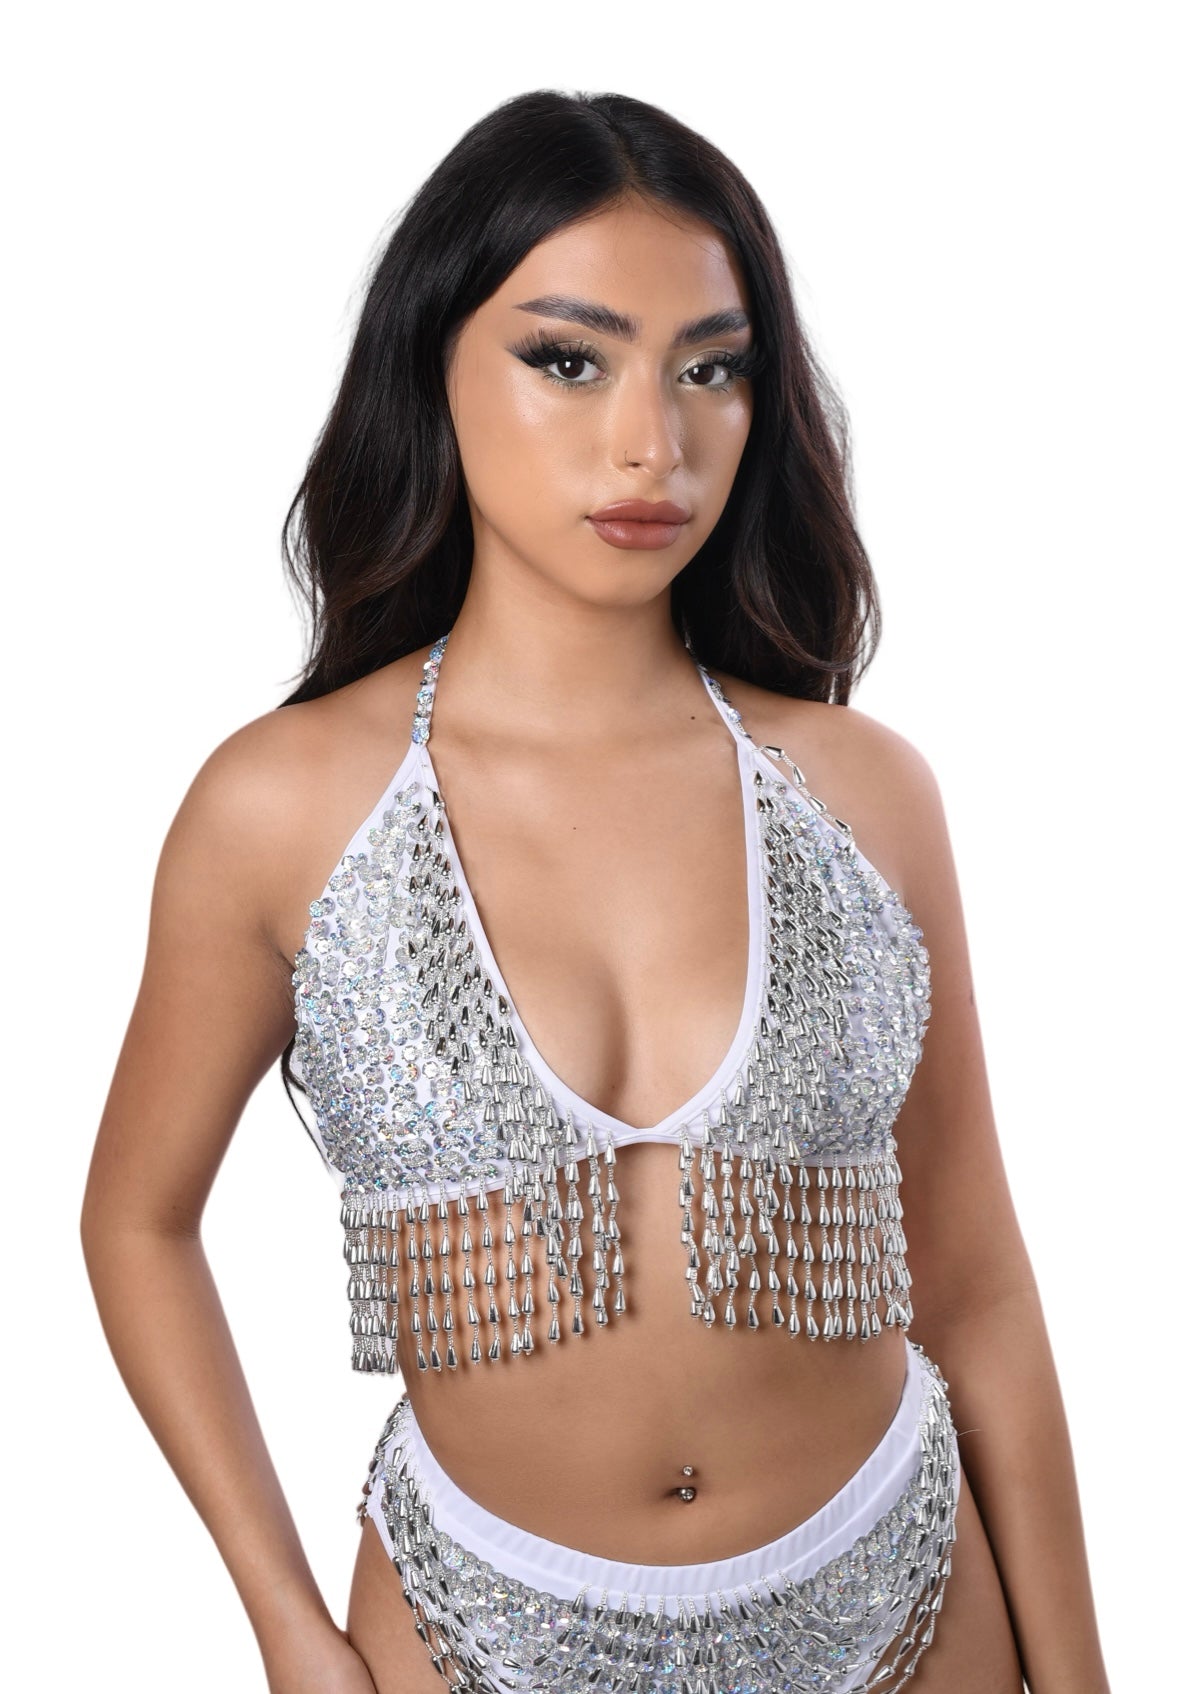 Hand Stitched Sequin Bra Top - Moonlight Rave clothes,rave outfits,edc –  THE LUMI SHOP